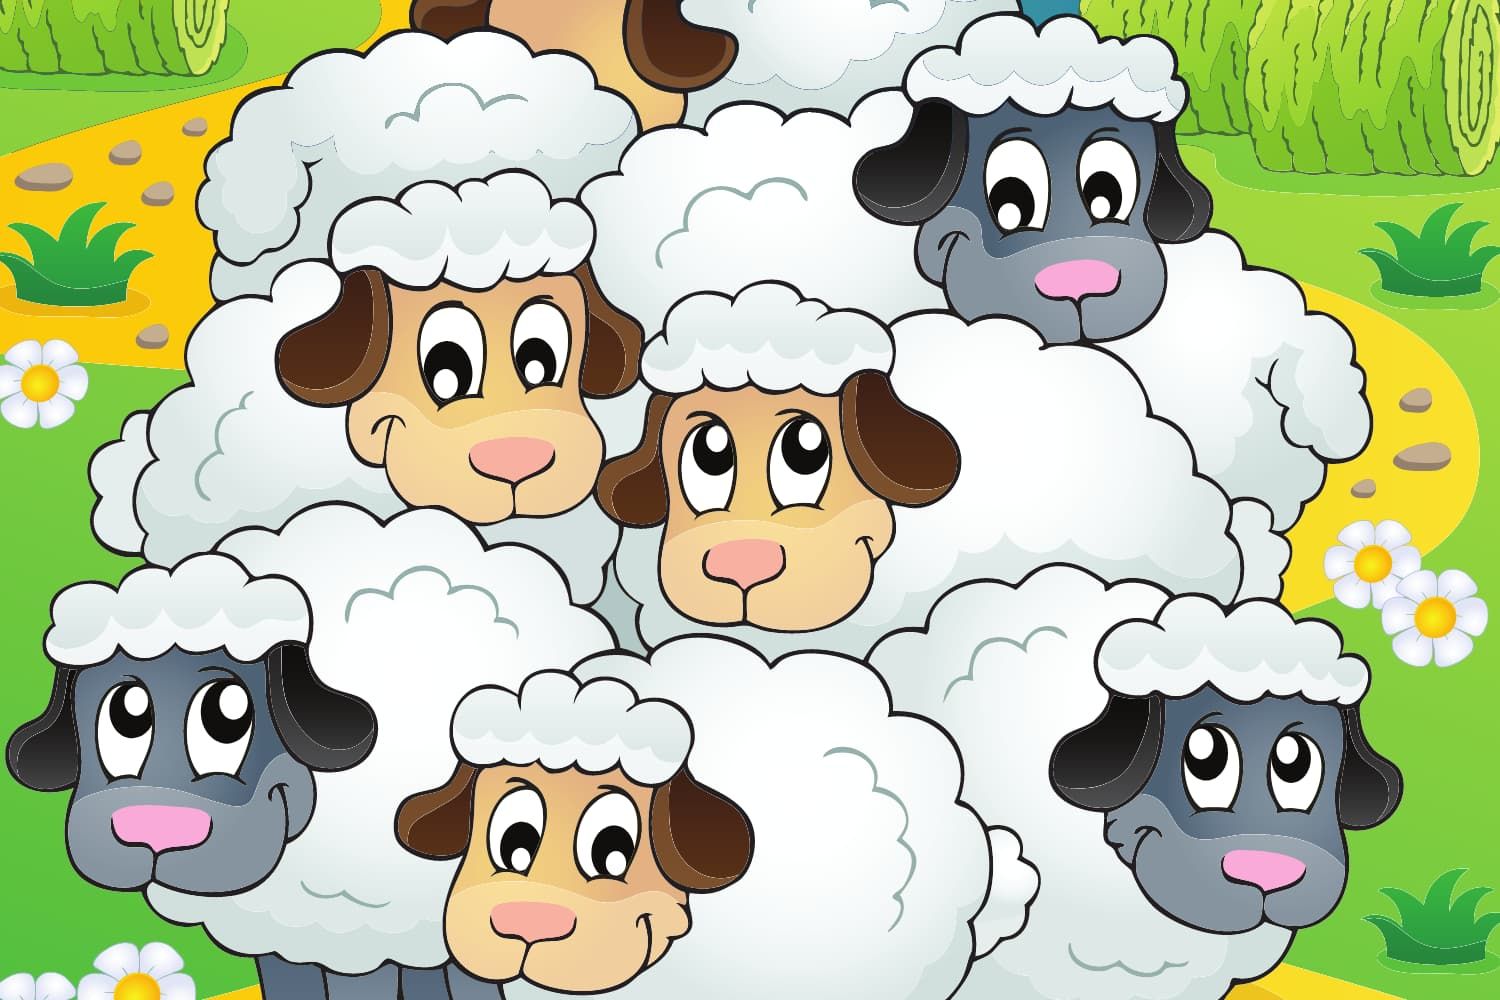 Game%20-%20NT%20Parable%20of%20the%20lost%20sheep%20-%20Count%20the%20sheep-b72376df Sheep / shepherd